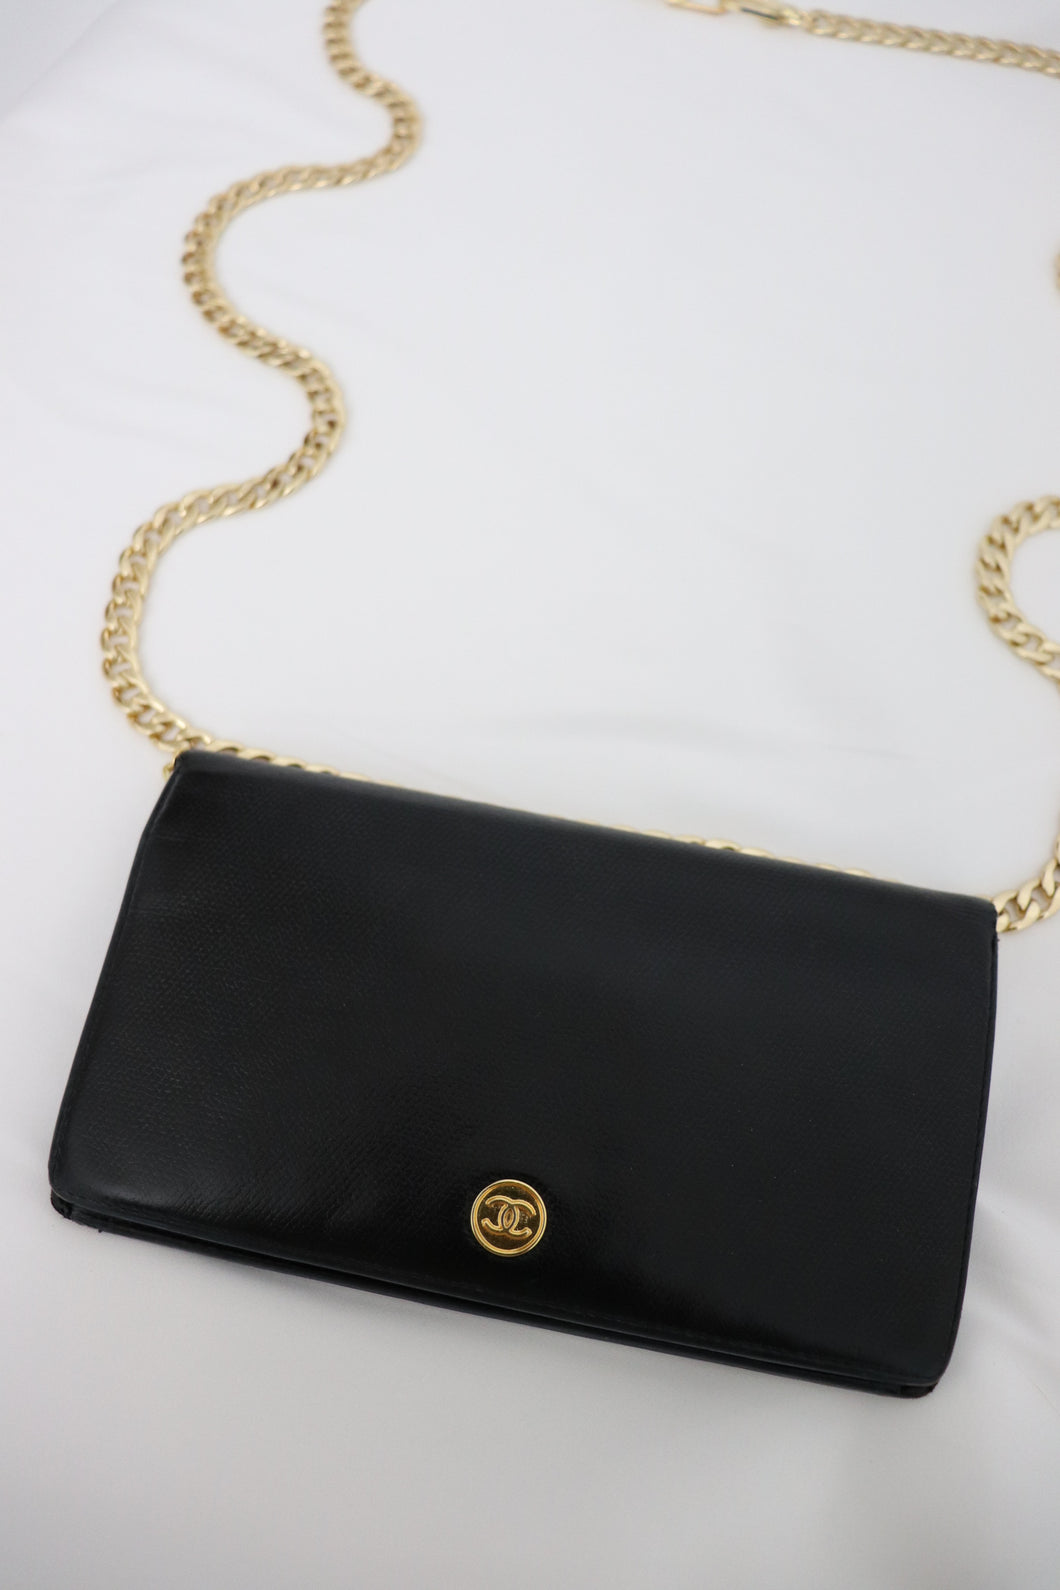 Chanel wallet with golden button